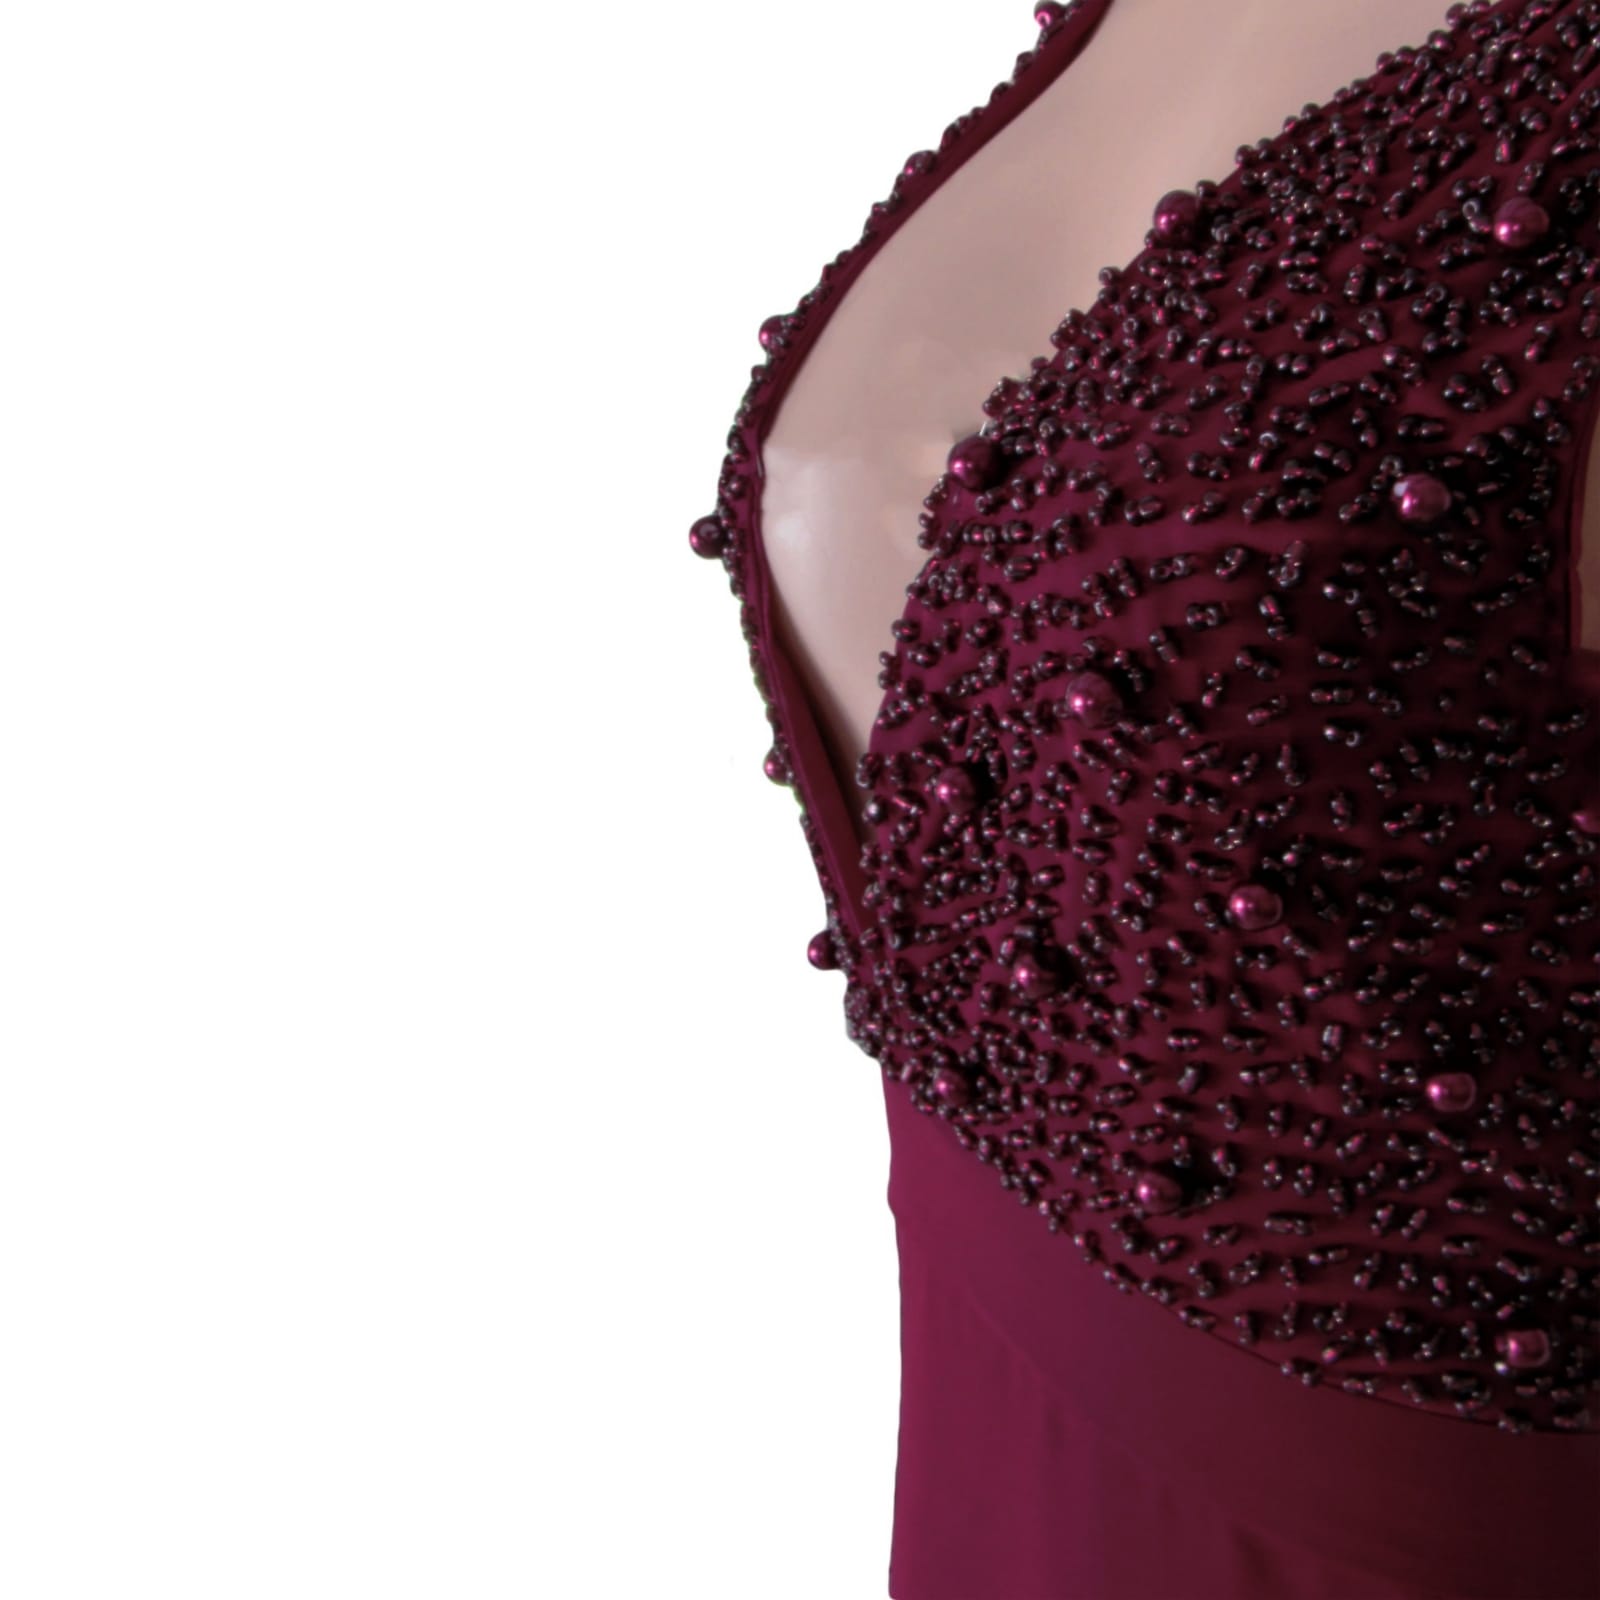 Burgundy plunging neckline long prom dress 6 burgundy plunging neckline long matric dance dress with a slit and a train. With a beaded bodice.